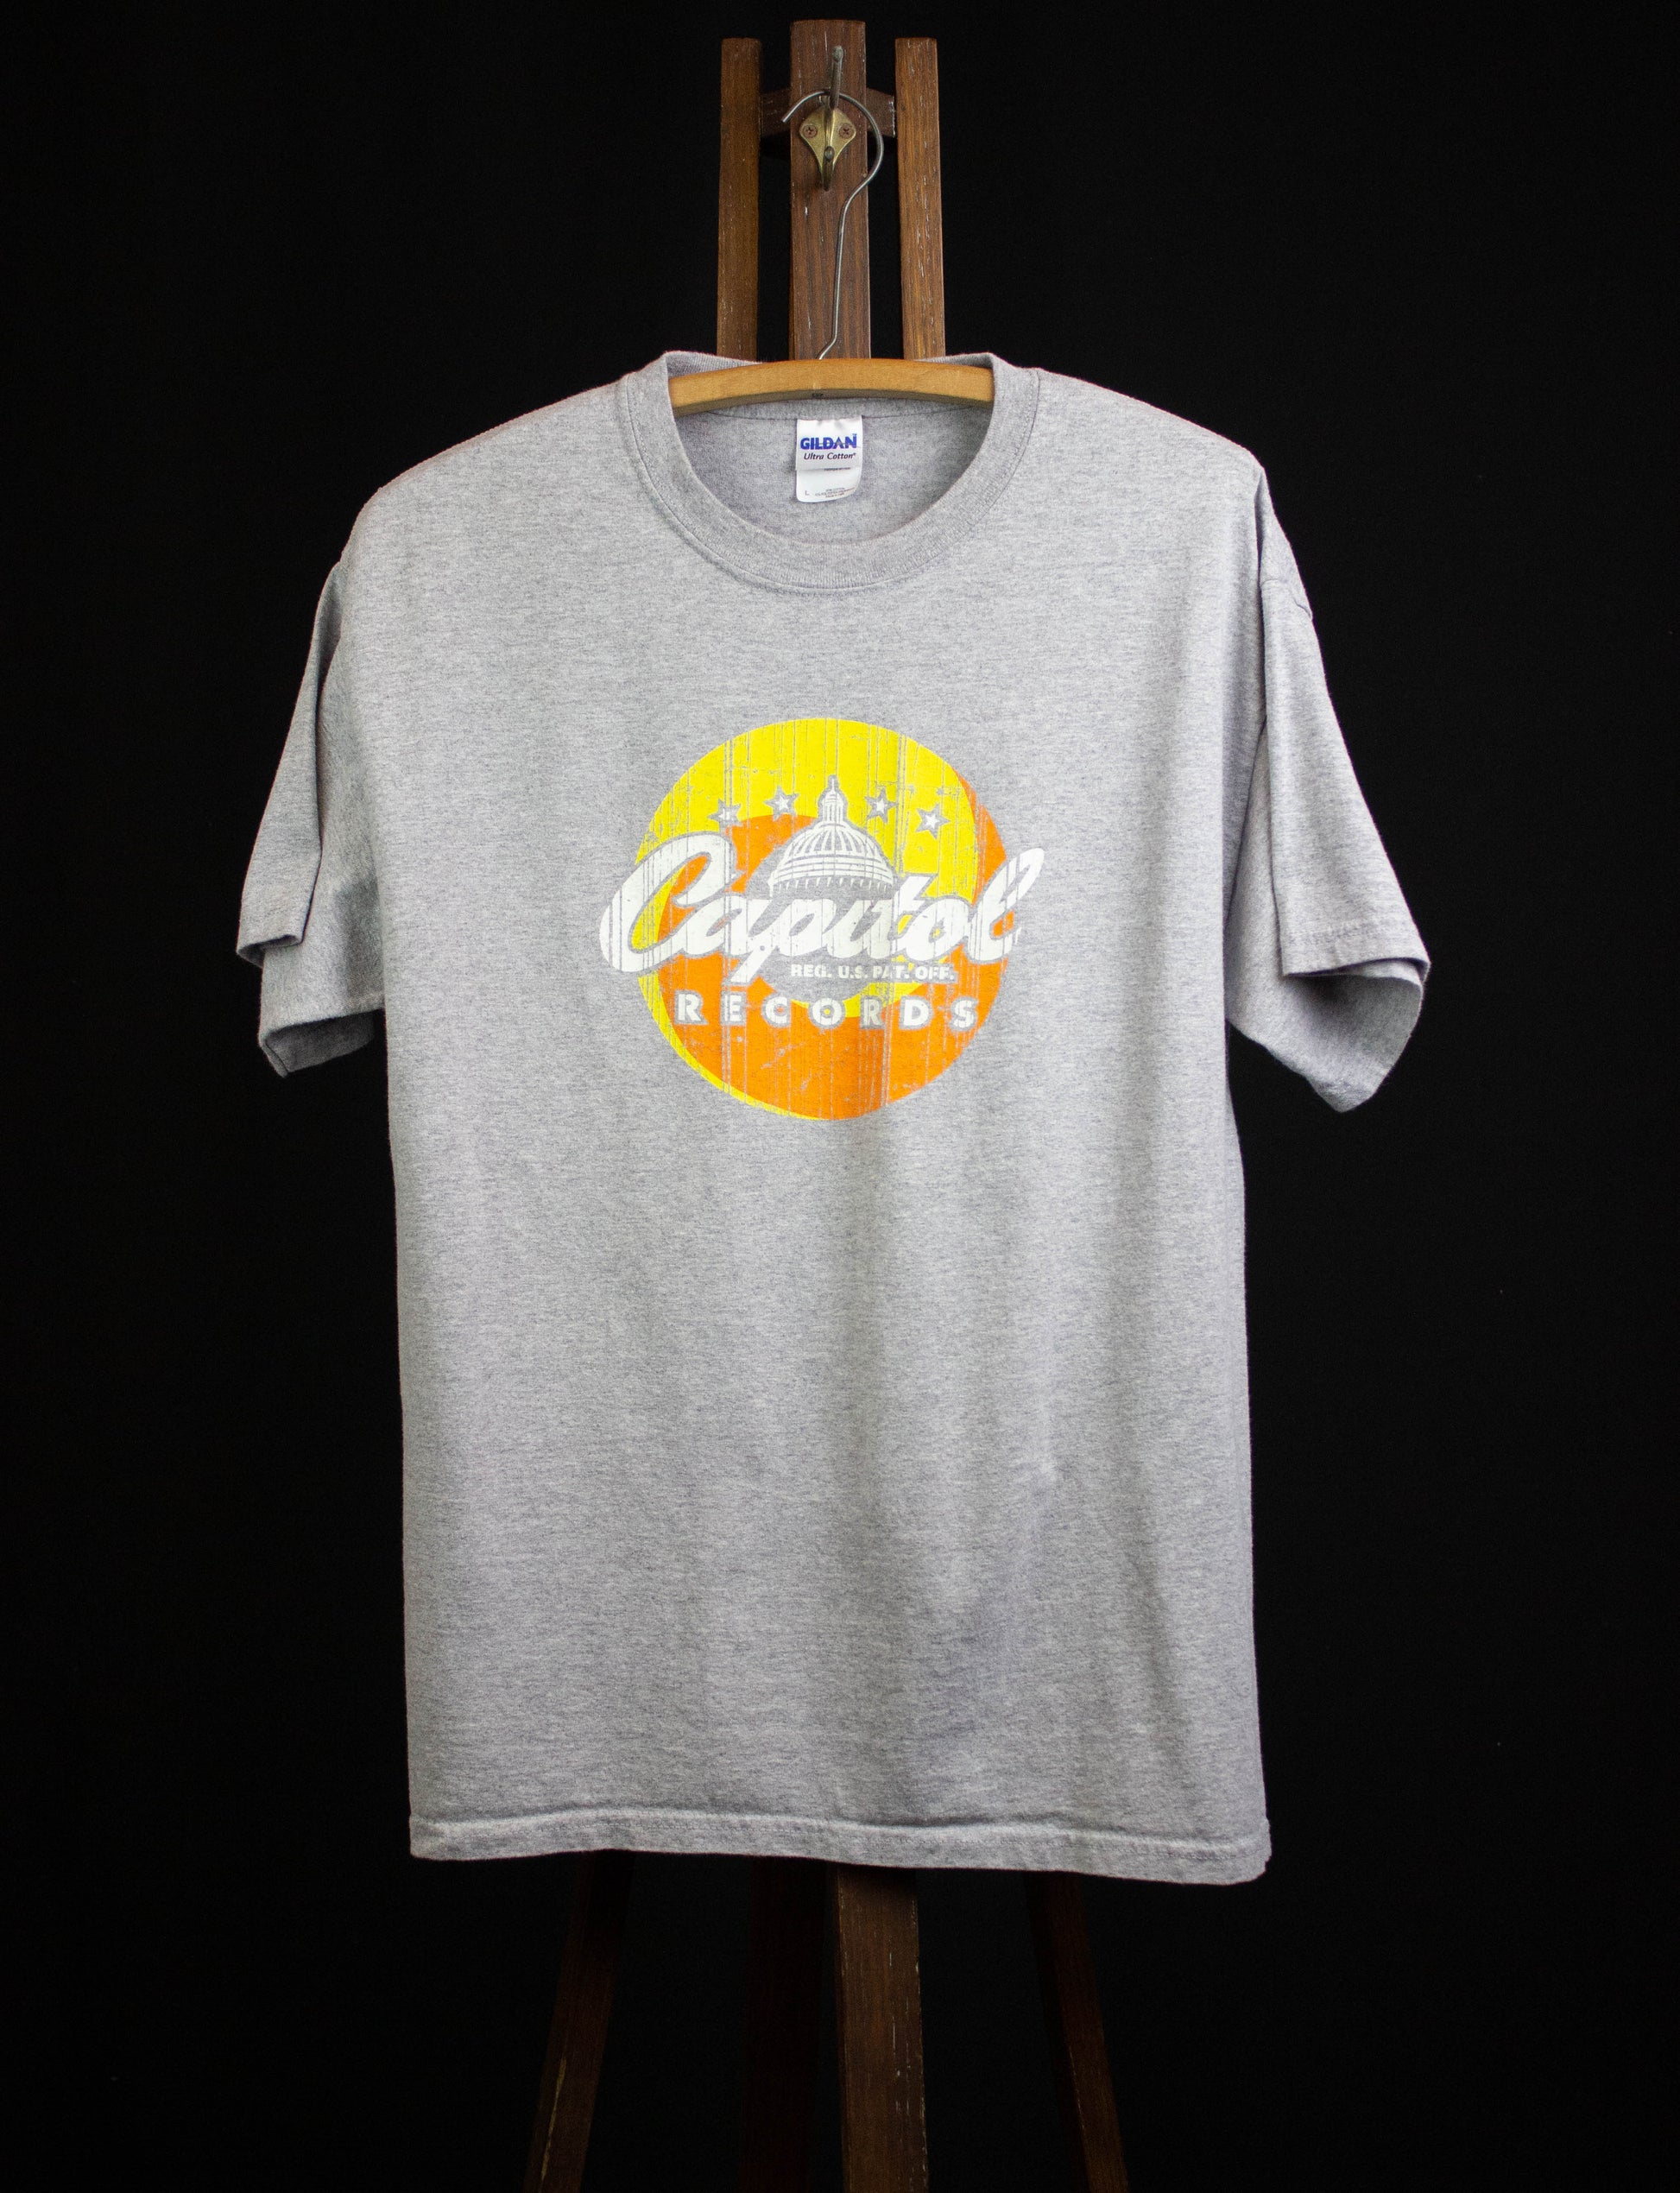 Vintage Capital Records Graphic T Shirt Gray Large